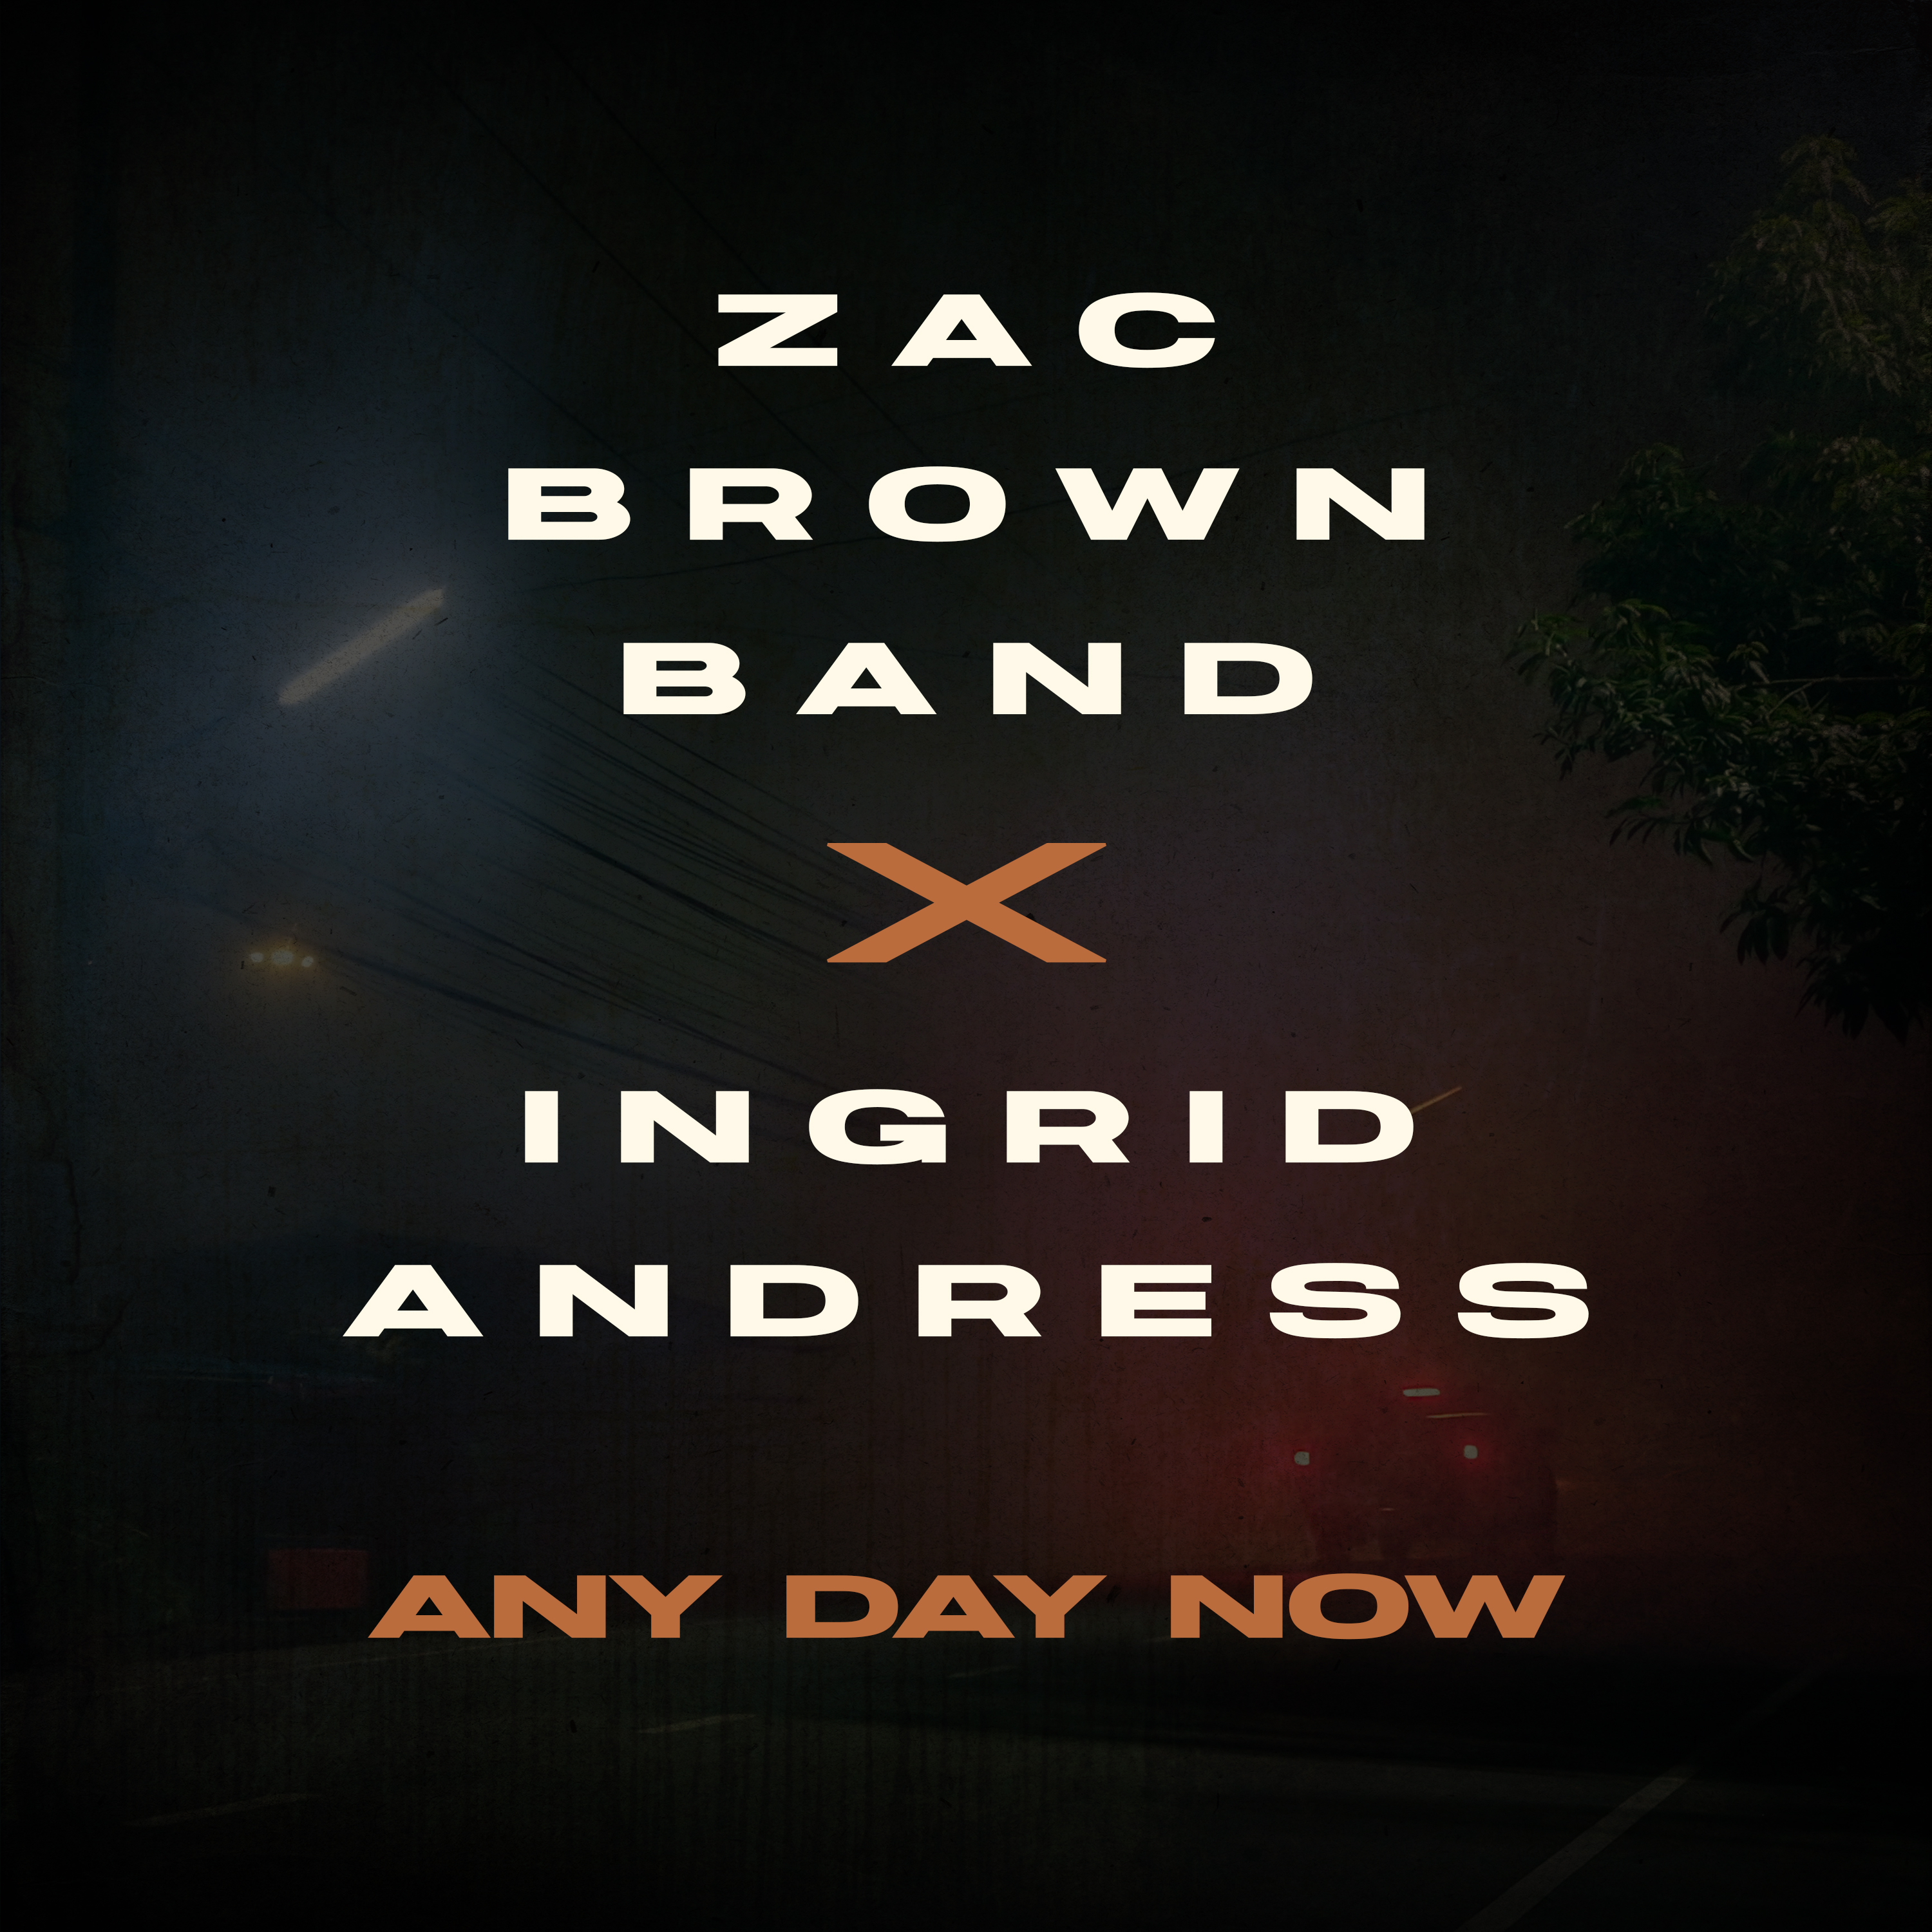 ZAC BROWN BAND ENLISTS INGRID ANDRESS FOR BRAND NEW VERSION OF “ANY DAY NOW” OUT TODAY